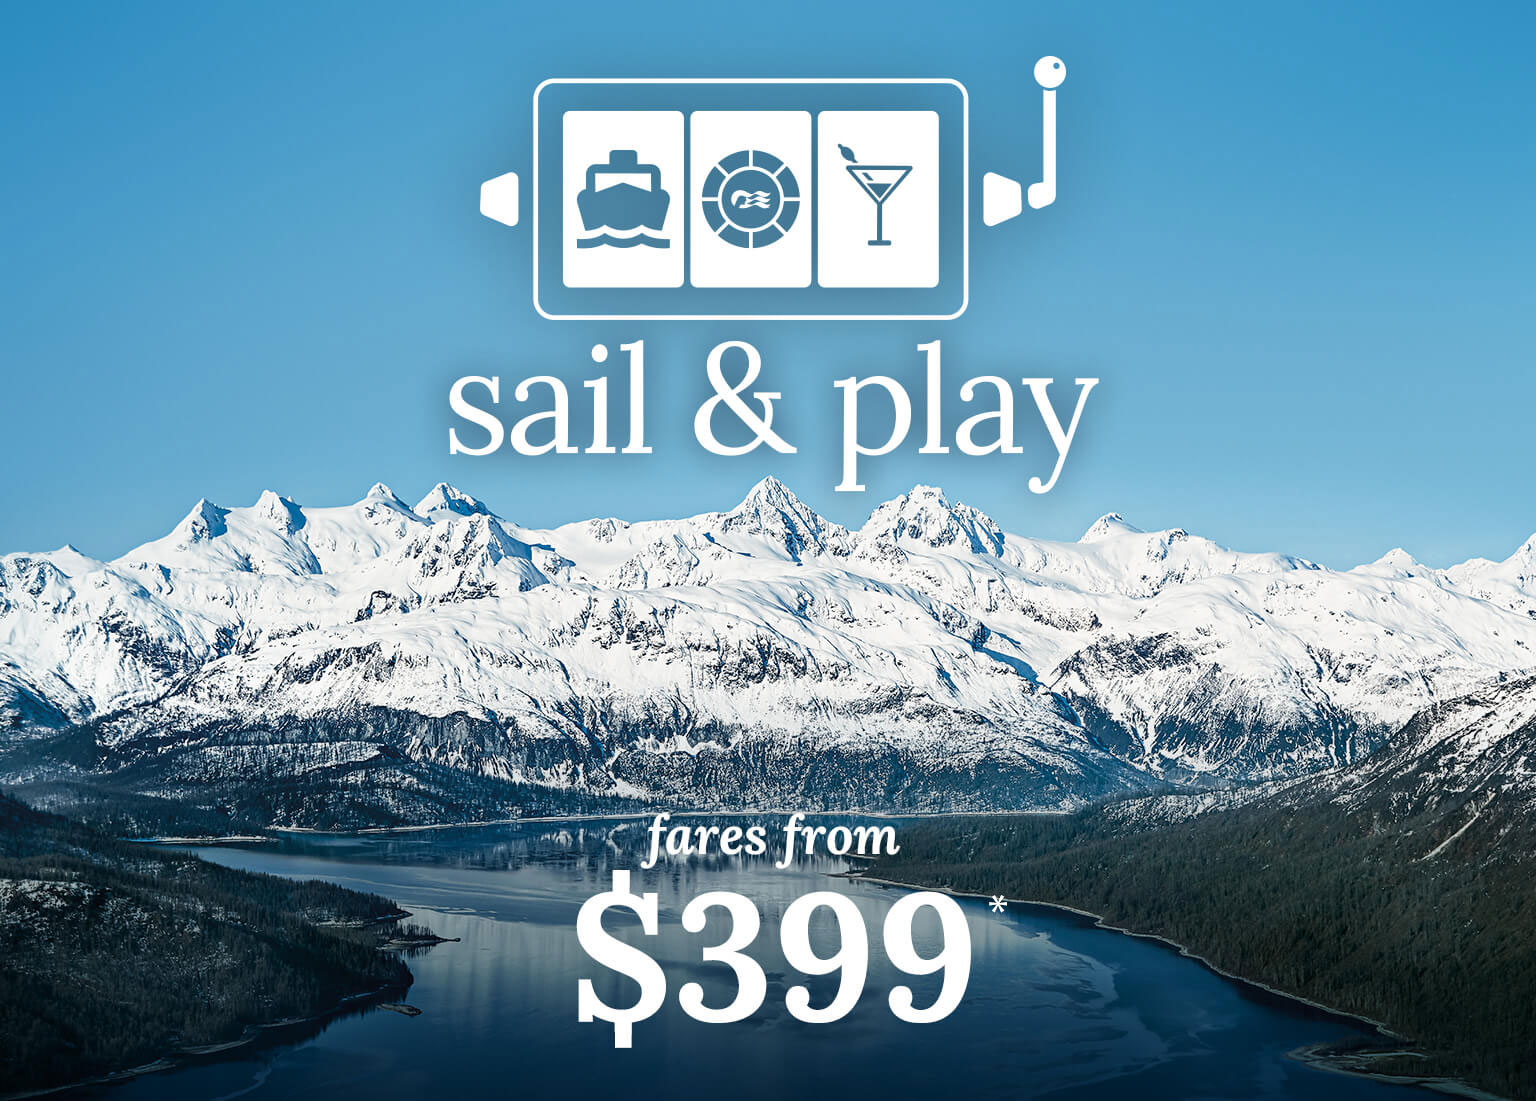 sail & play - fares from $399